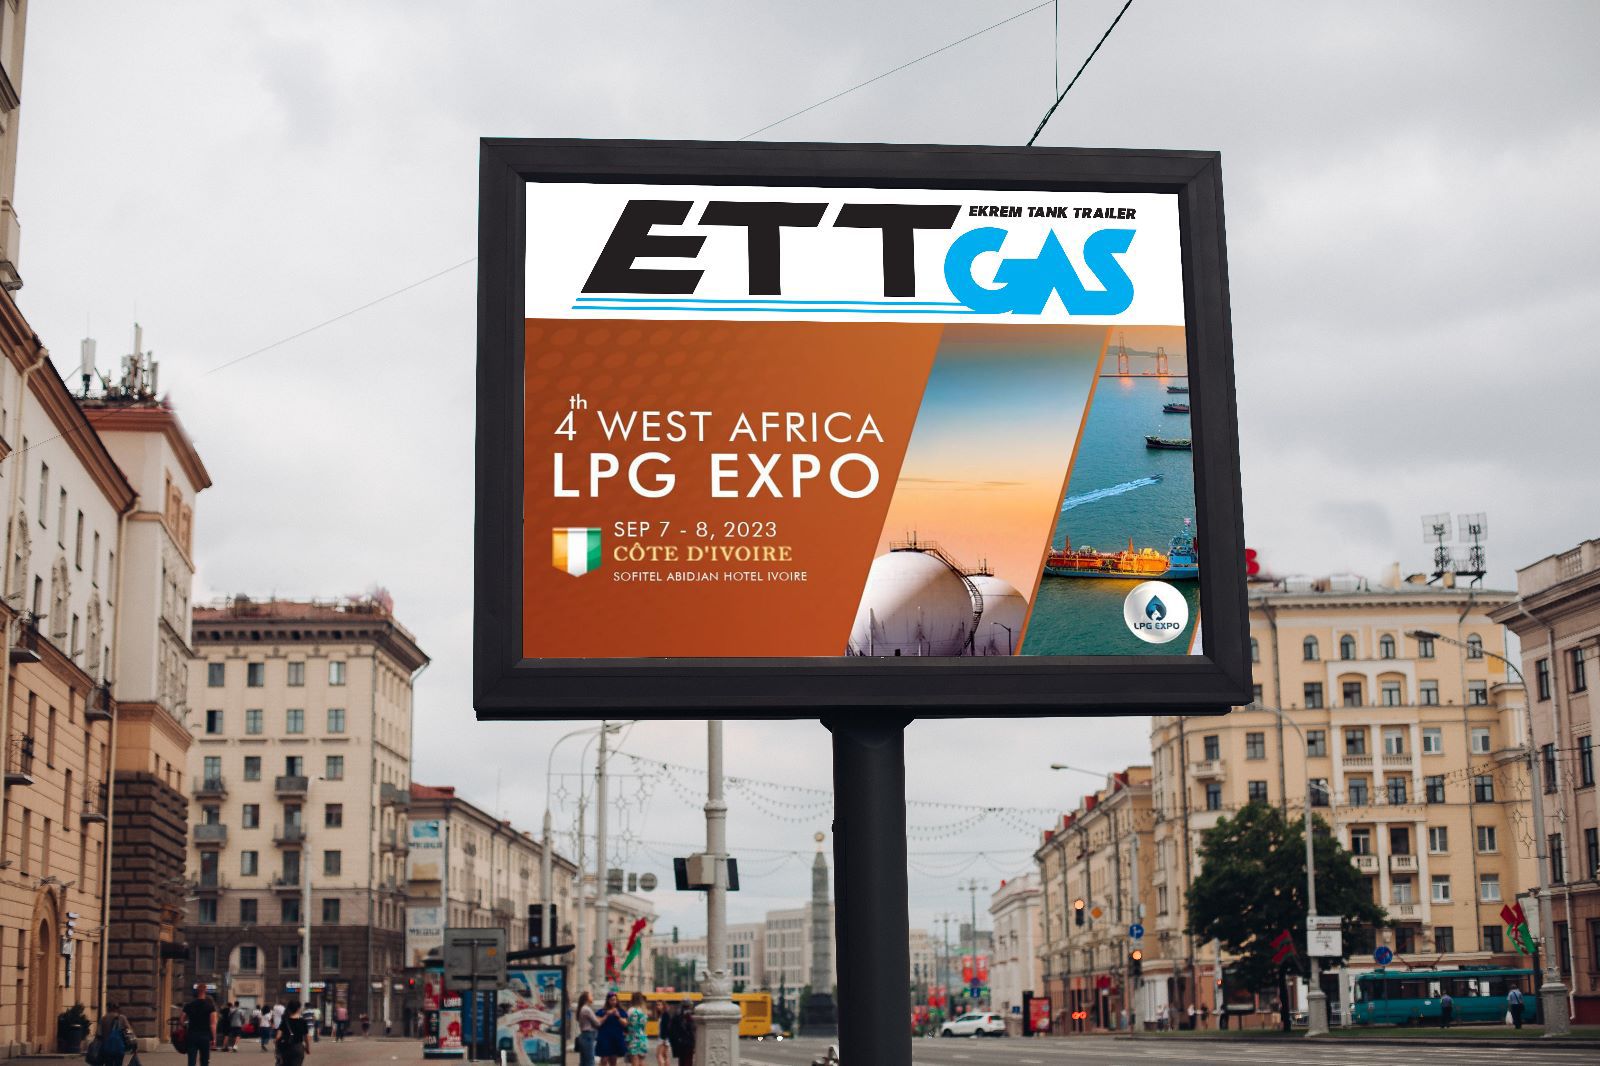 4th West Africa LPG Expo - Cote D'ivoire  We will attend the Lpg Summit fair in Ivory Coast on 7-8 September. We are waiting our customers to our booth.